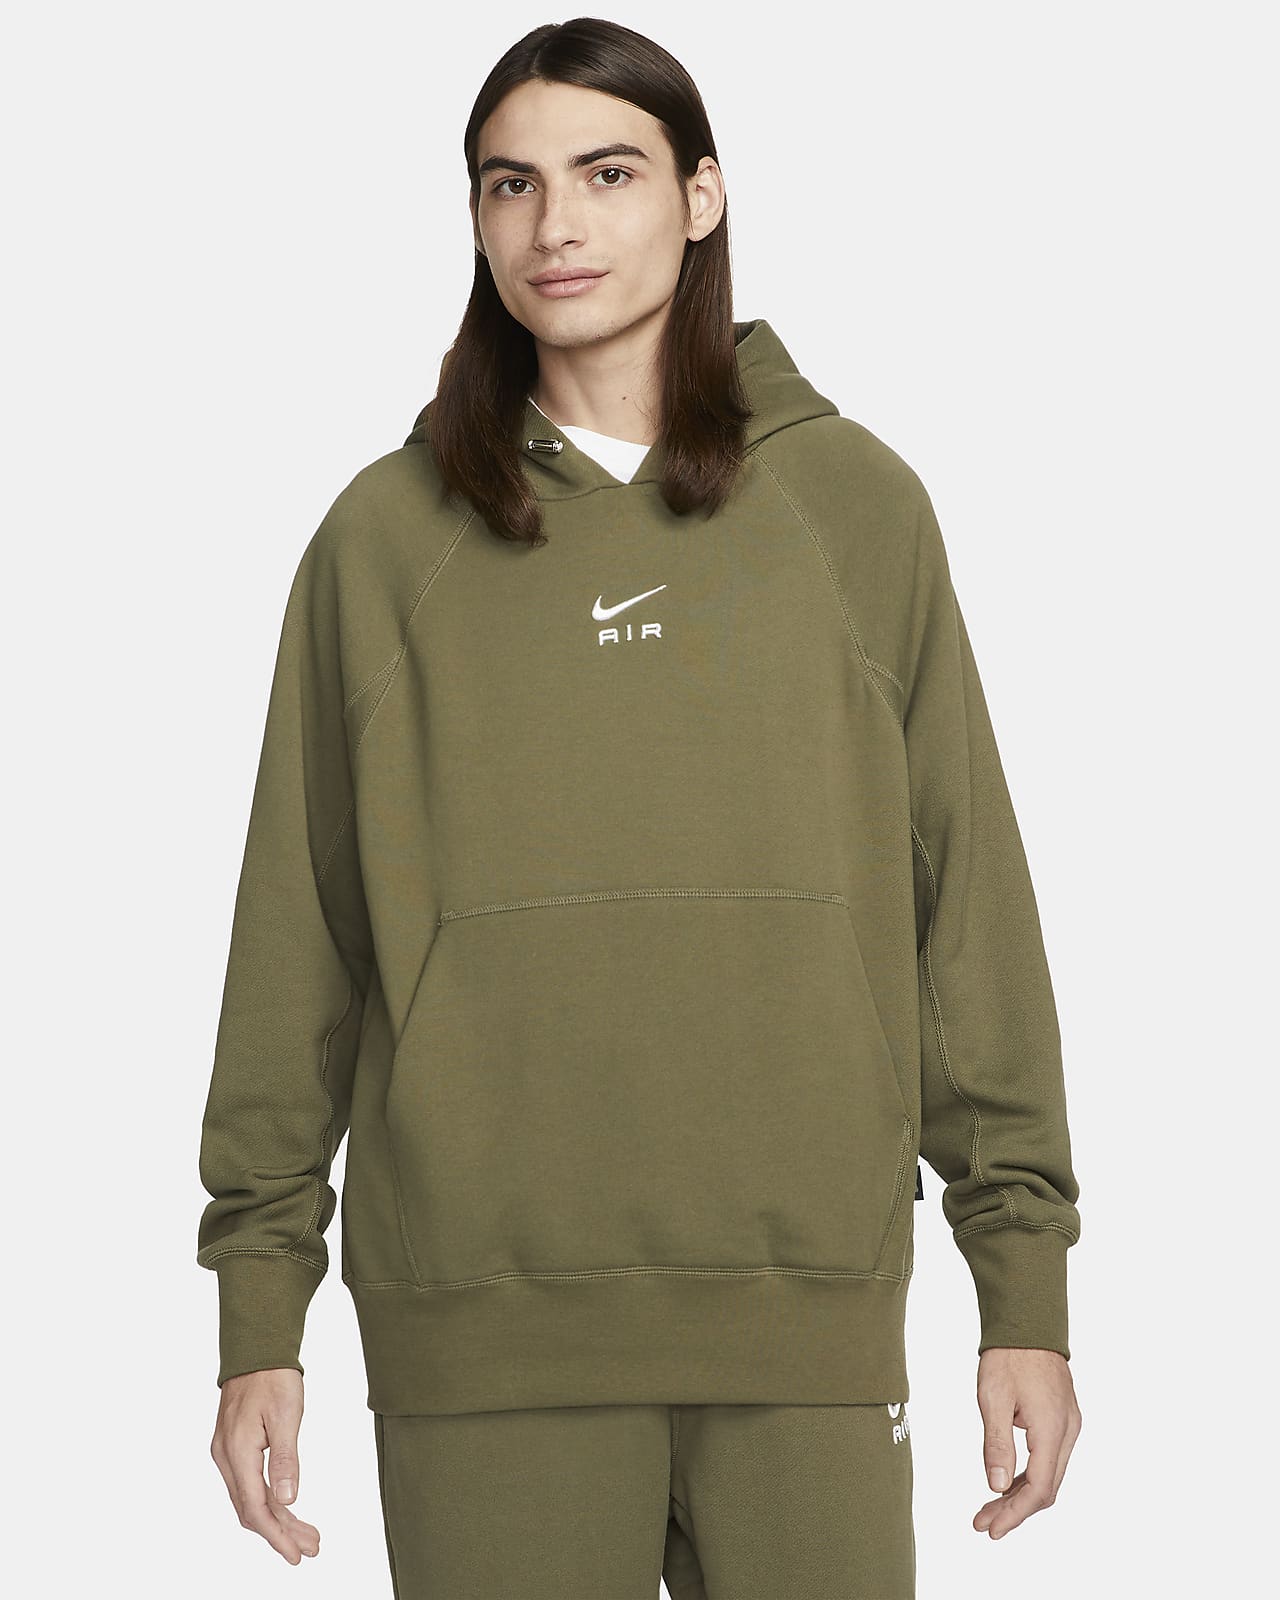 Nike Sportswear Air Men's French Terry Pullover Hoodie. Nike CA